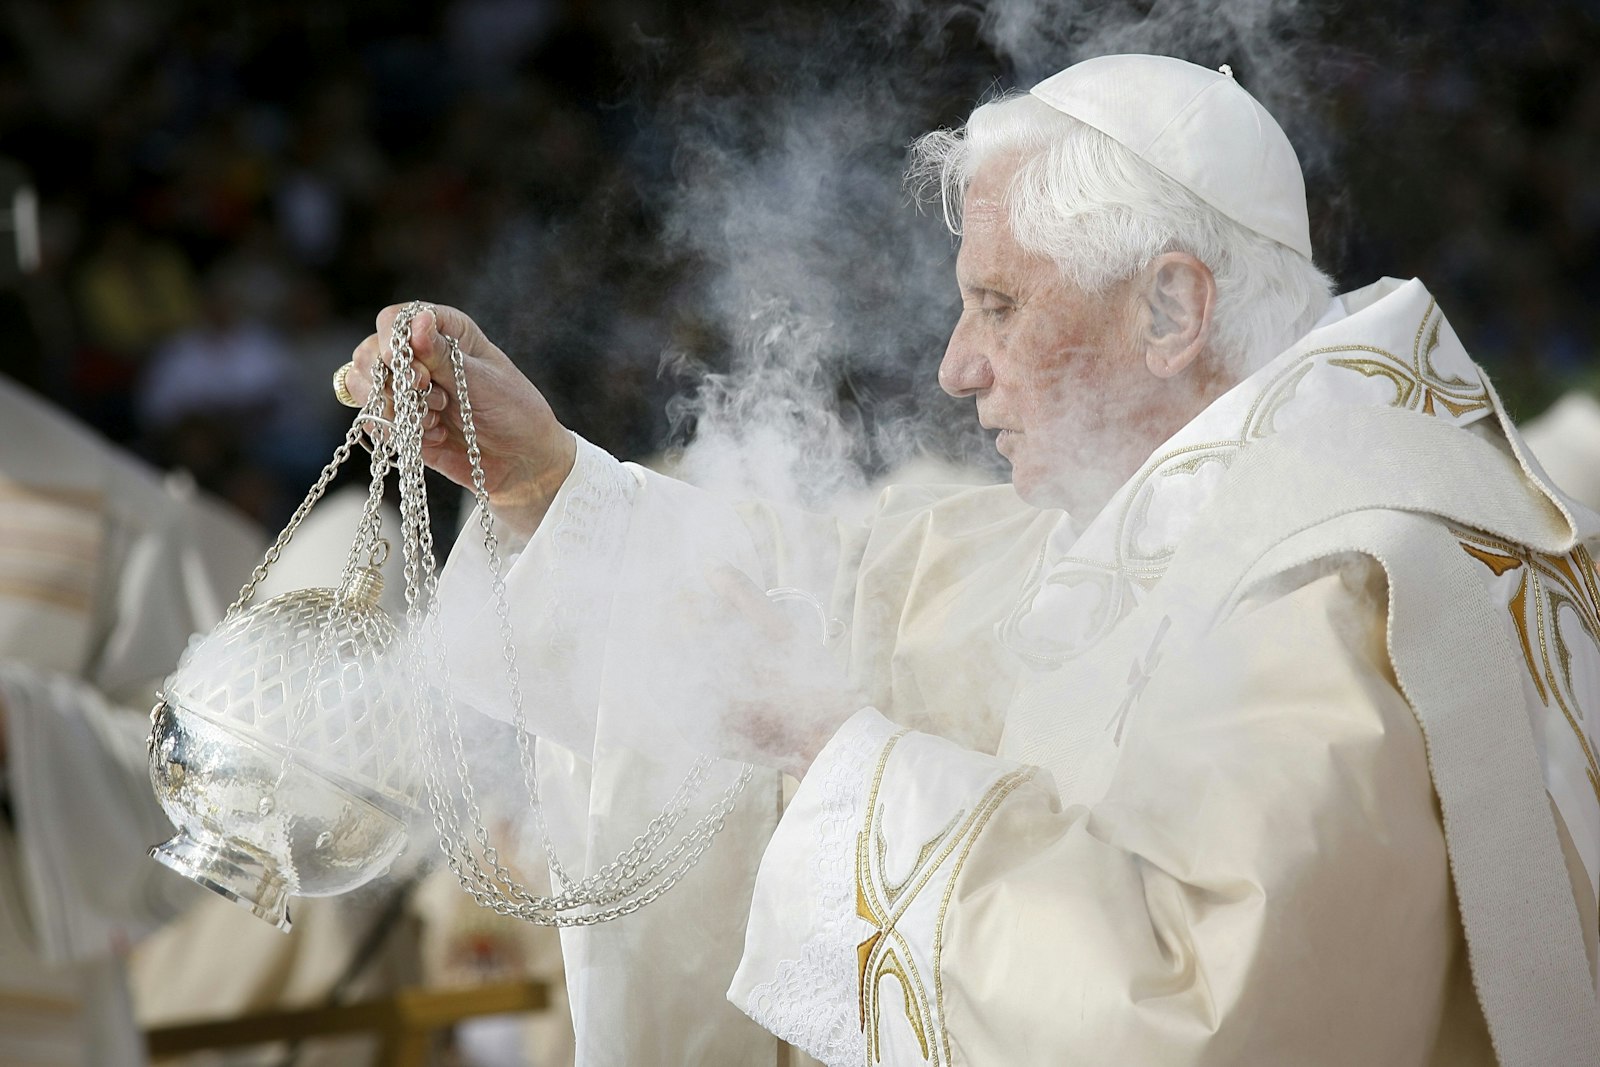 Pope Benedict XVI uses incense while celebrating Mass at Yankee Stadium in New York April 20, 2008. (CNS photo/Nancy Wiechec)